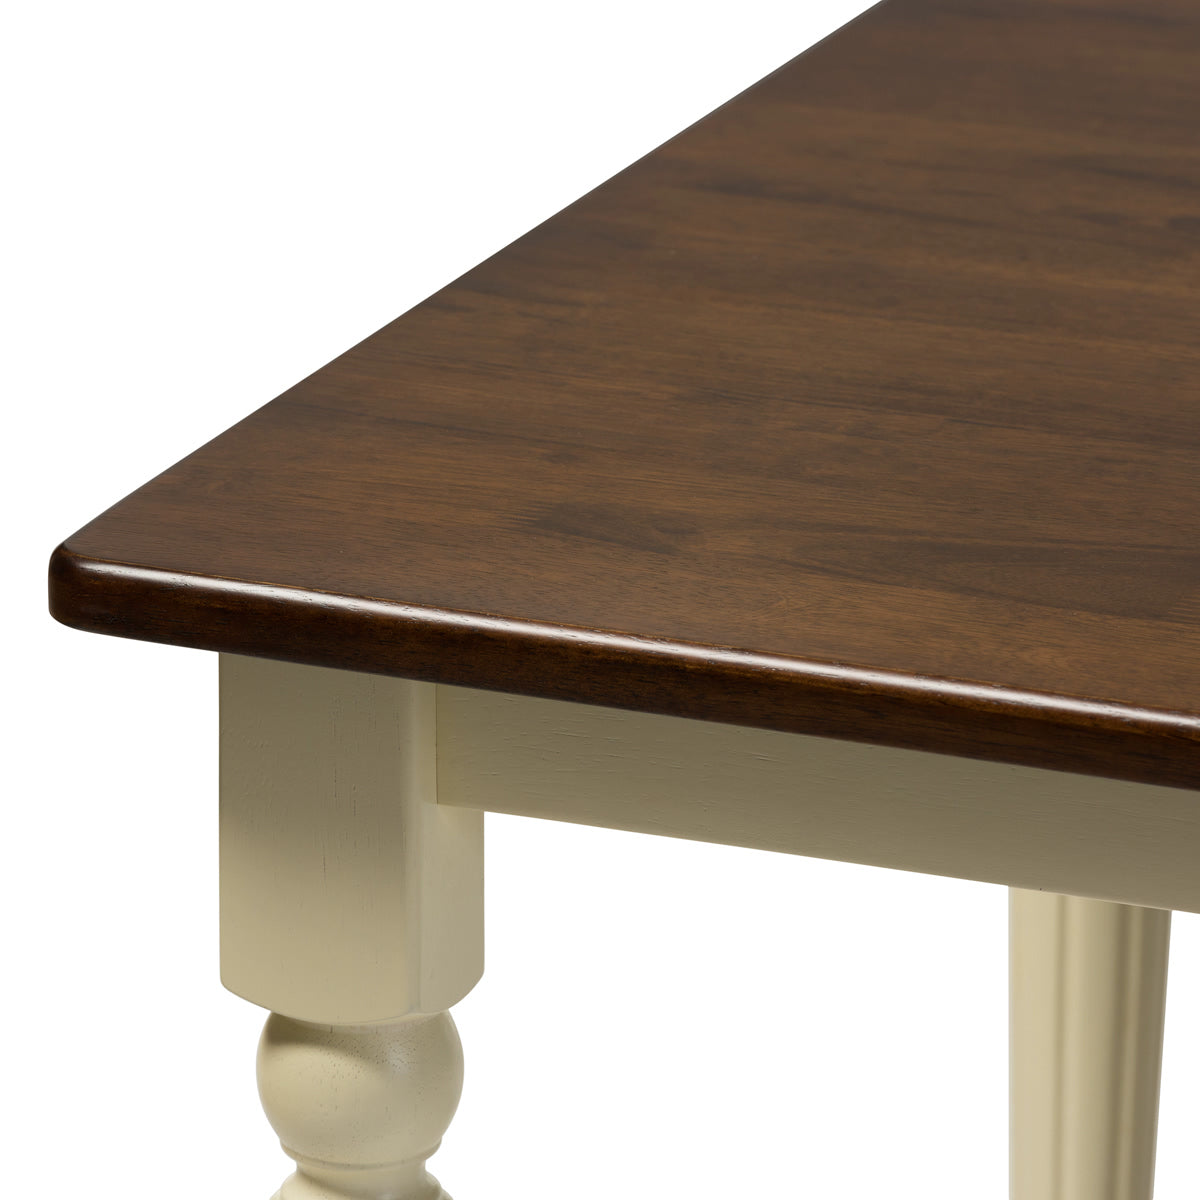 Baxton Studio Napoleon French Country Cottage Buttermilk and "Cherry" Brown Finishing Wood Dining Table Baxton Studio-dining table-Minimal And Modern - 6